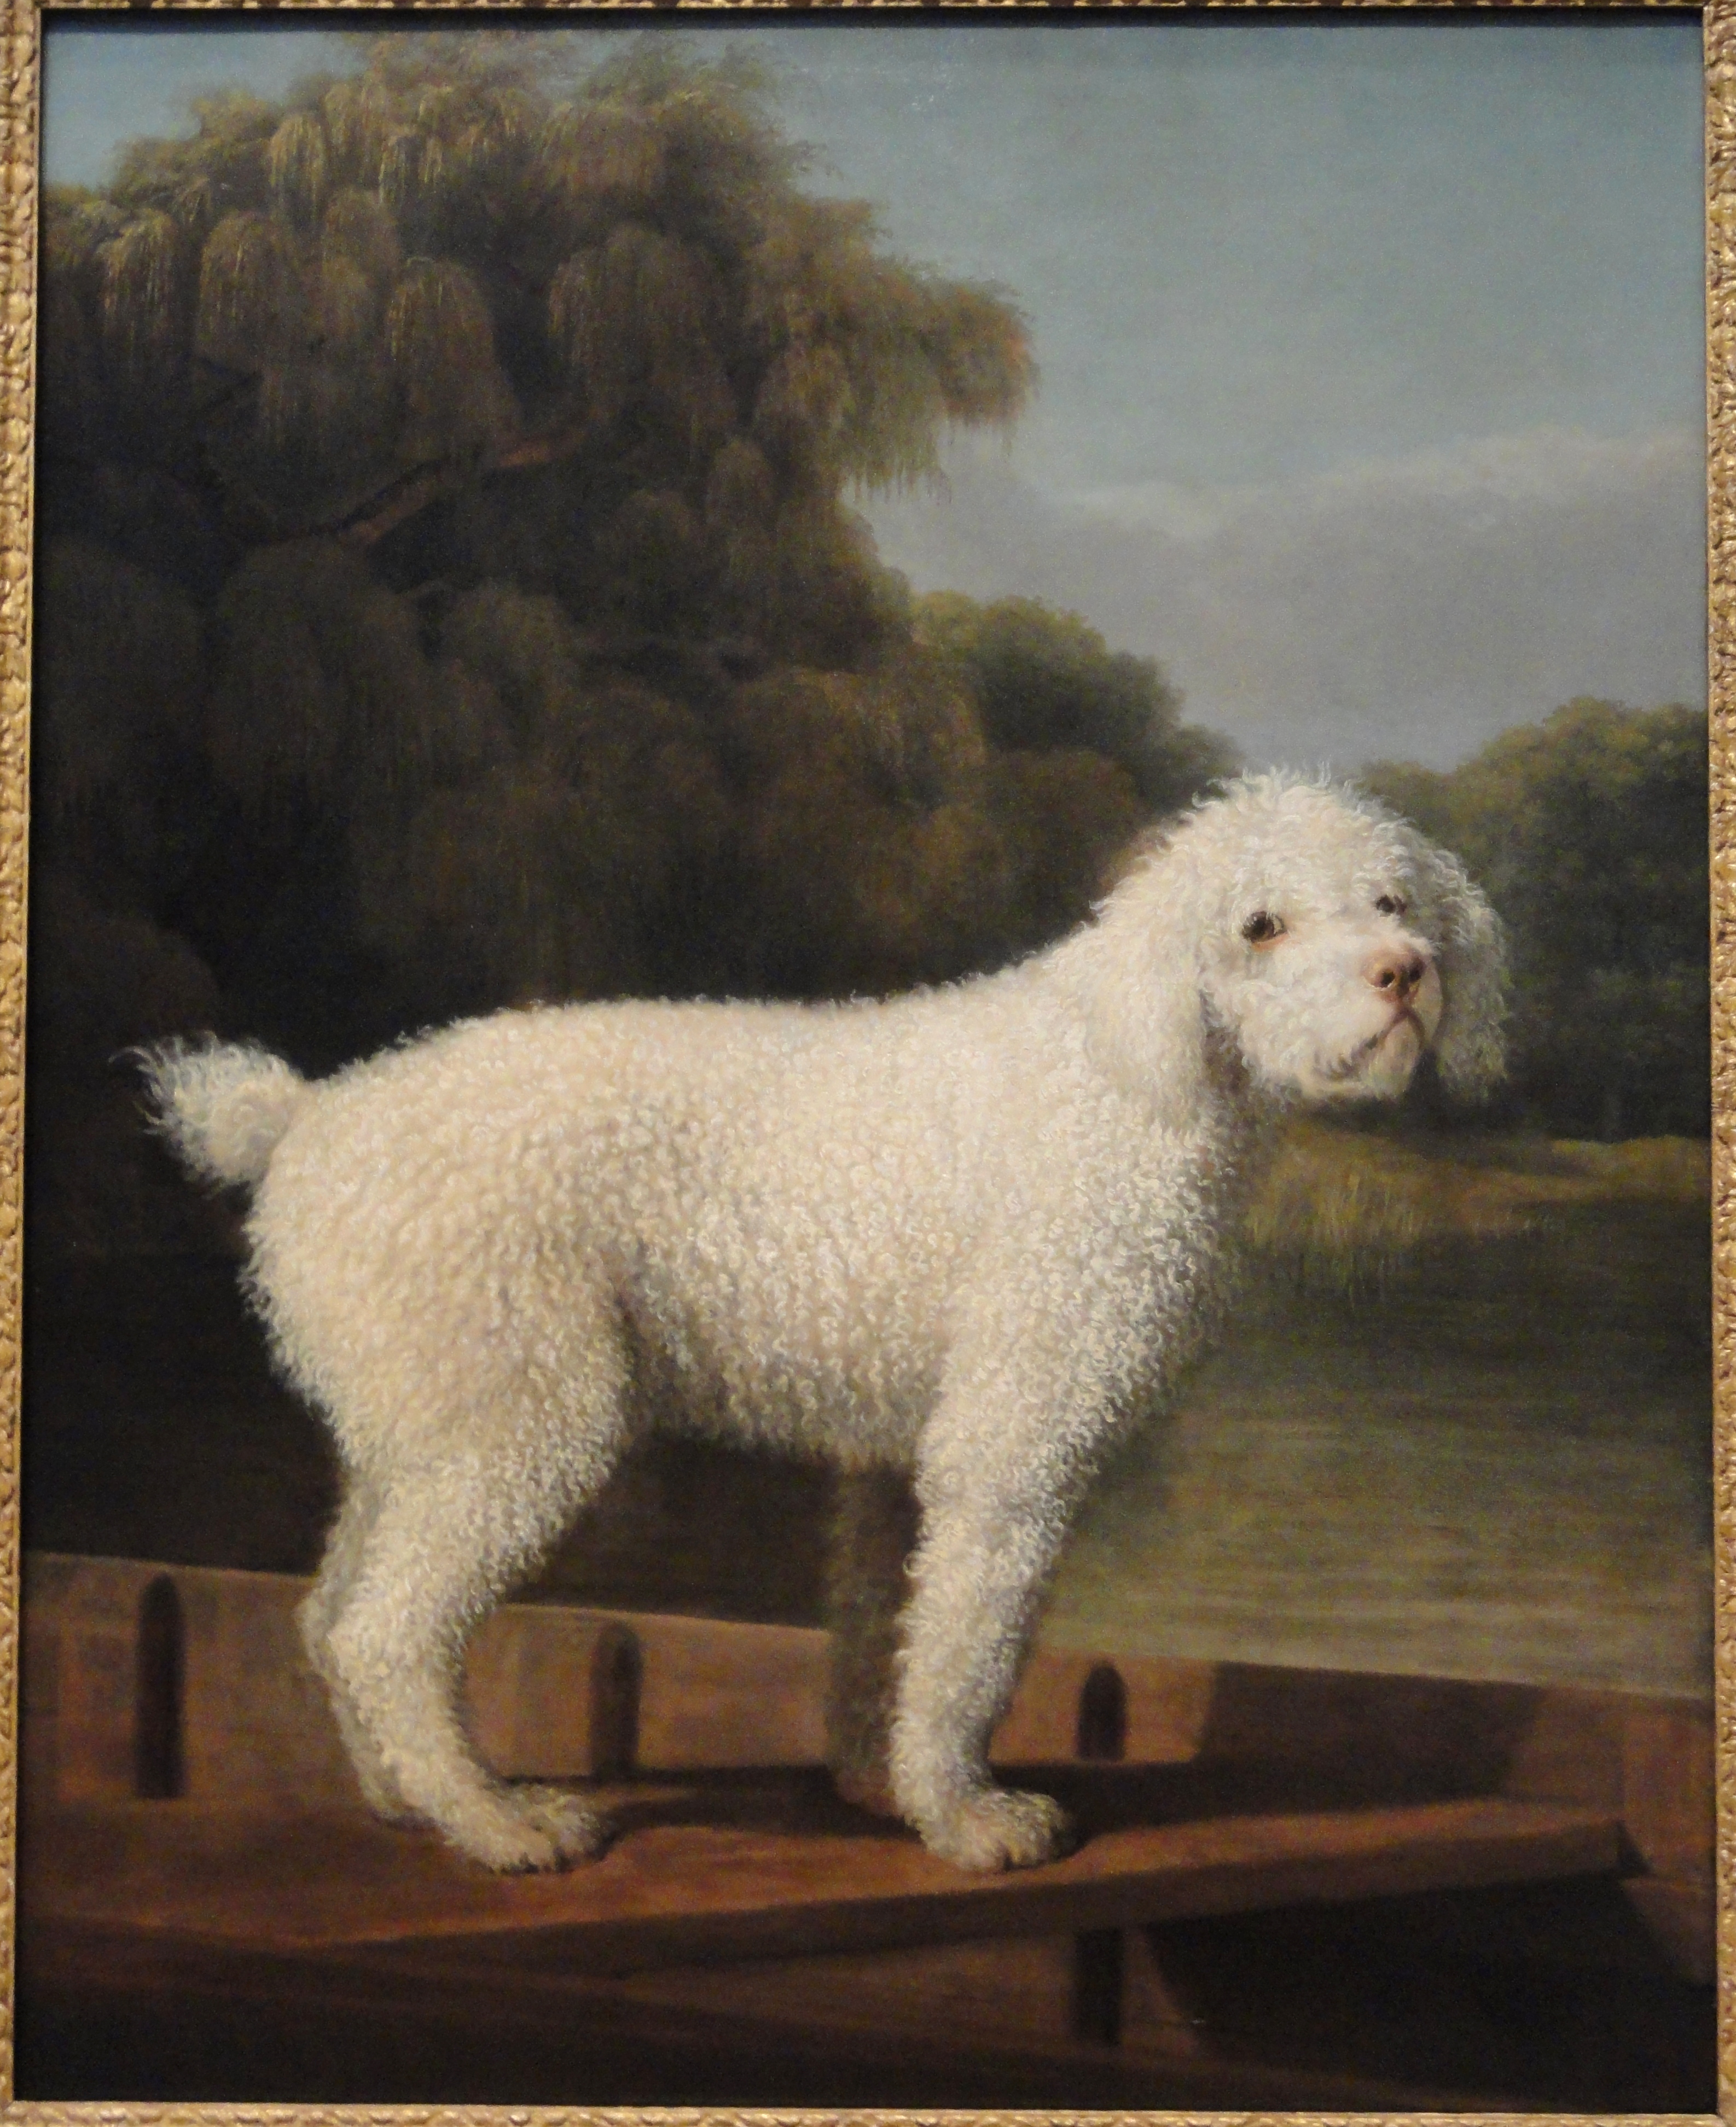 White Poodle in a Punt by George Stubbs - c. 1780 - 50 x 39 in National Gallery of Art